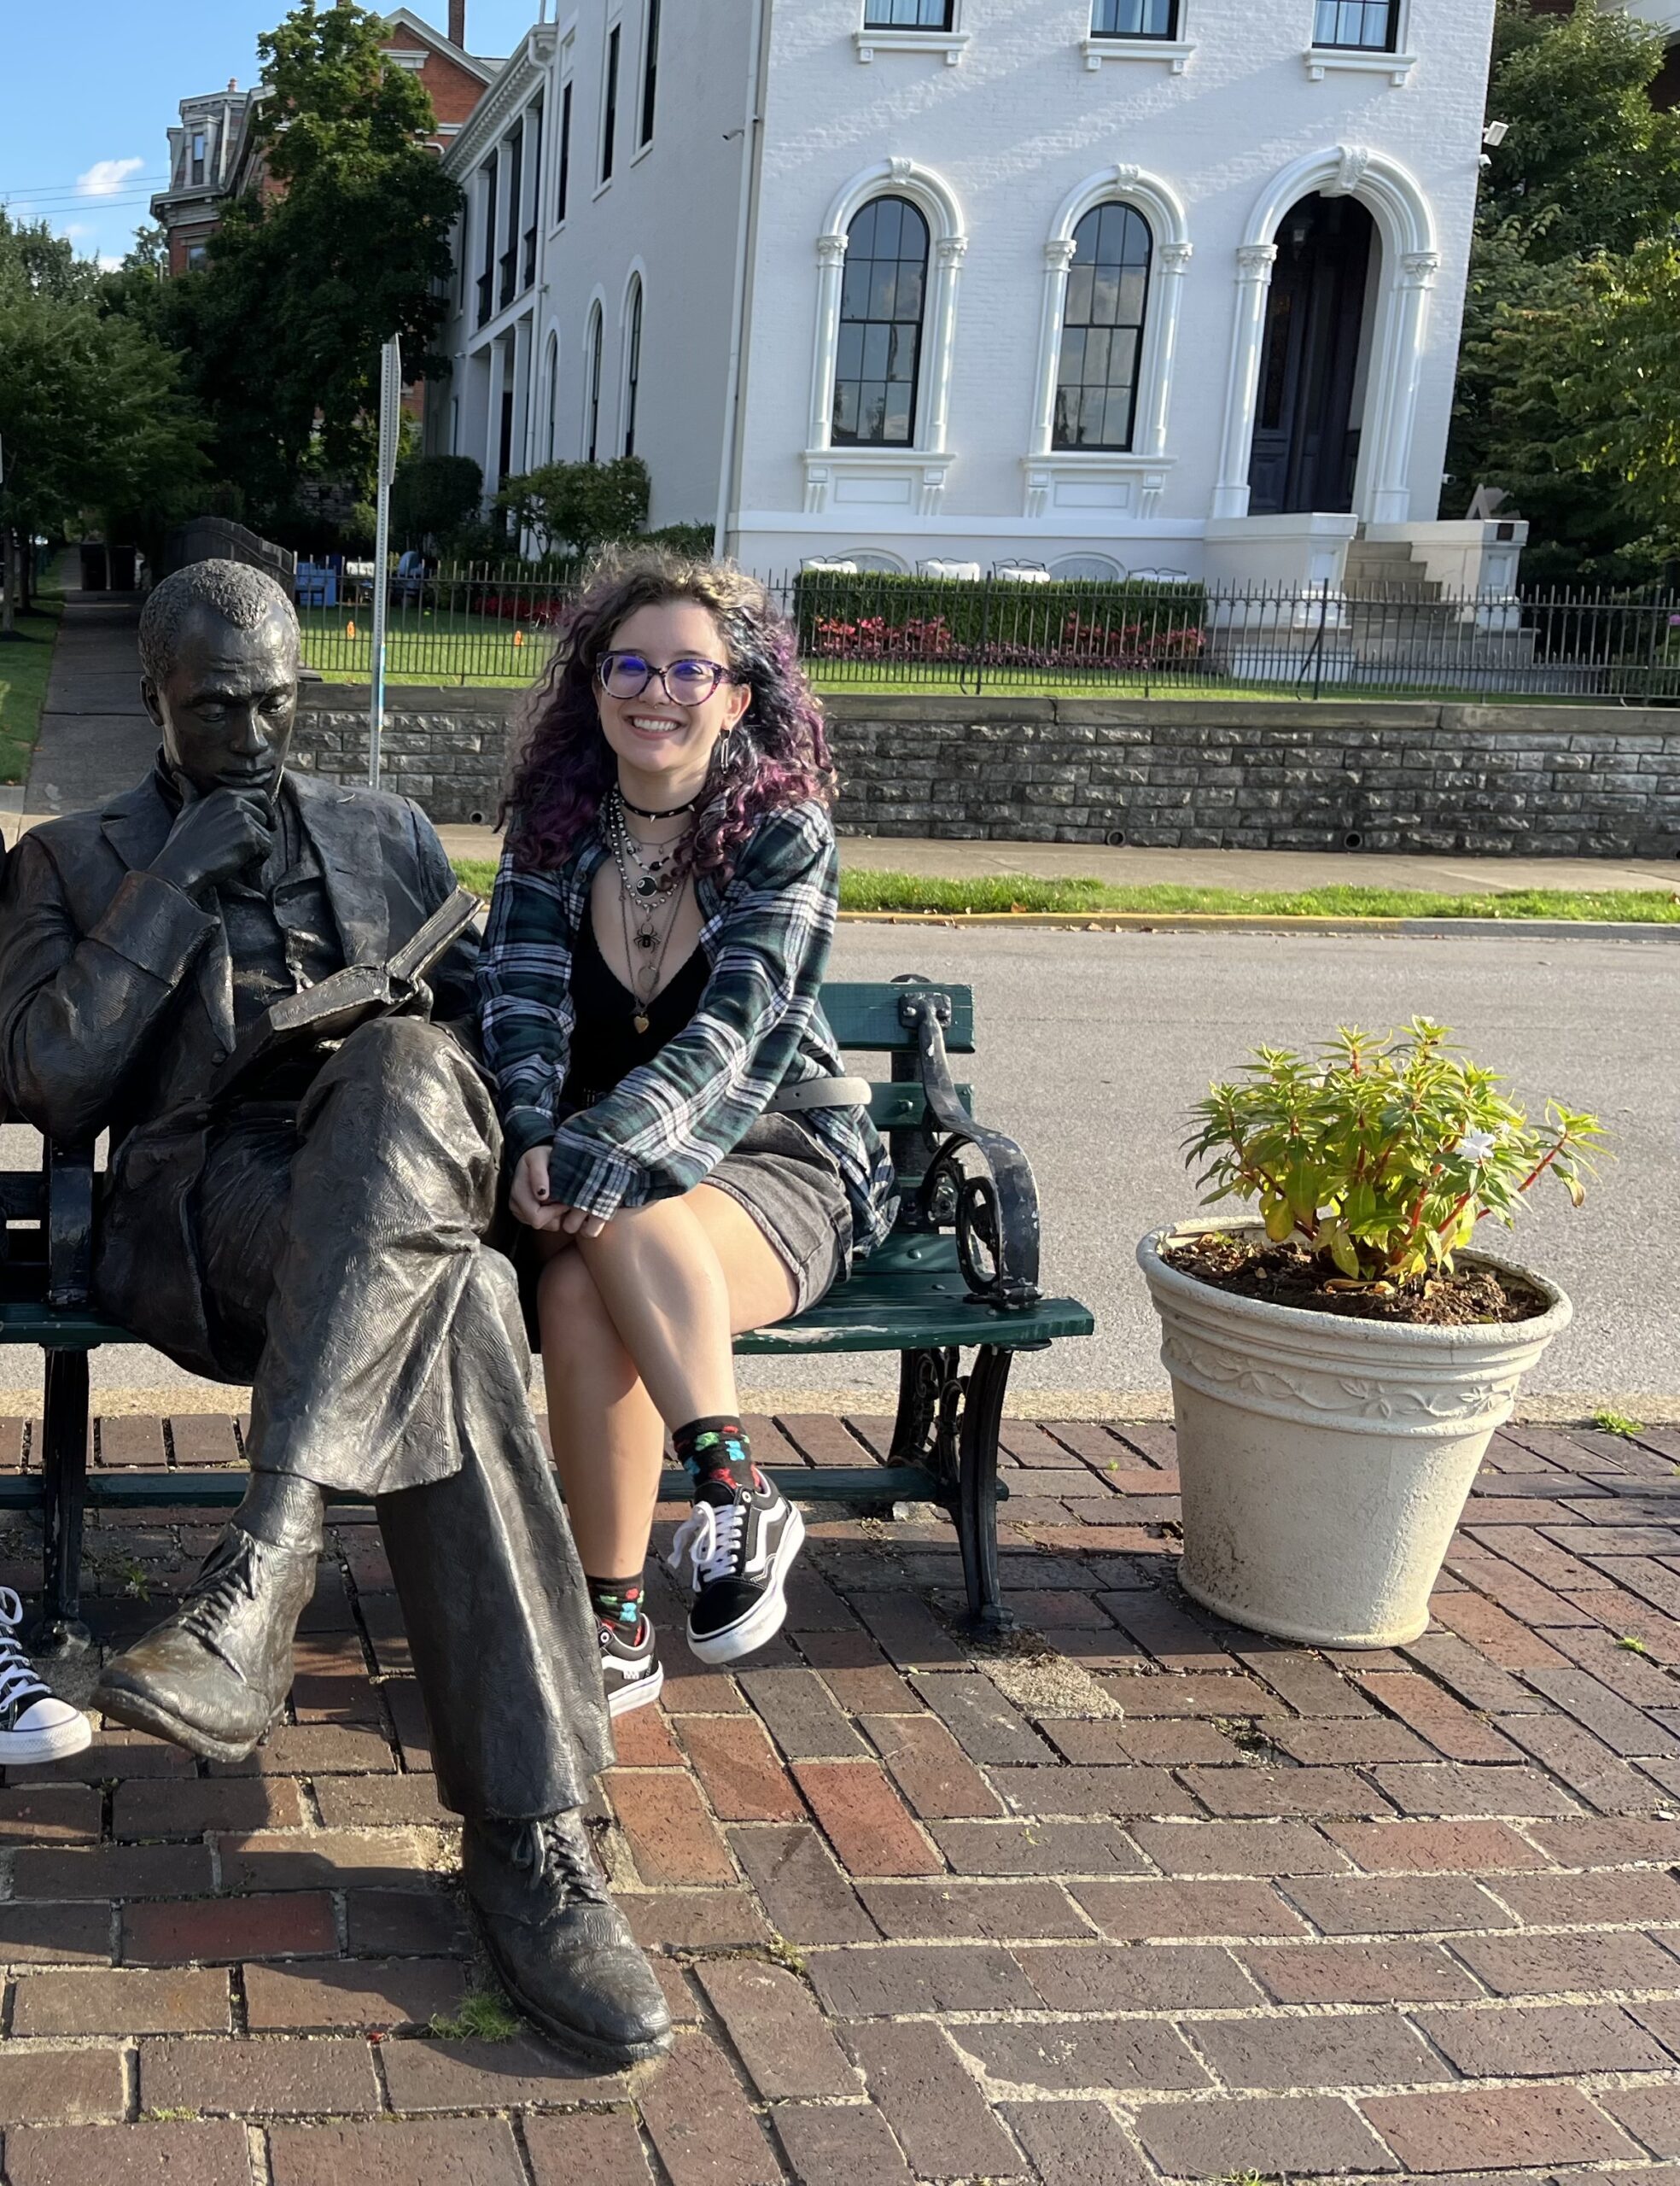 Madelyn Braun wearing vans sitting on a bench next to a statue